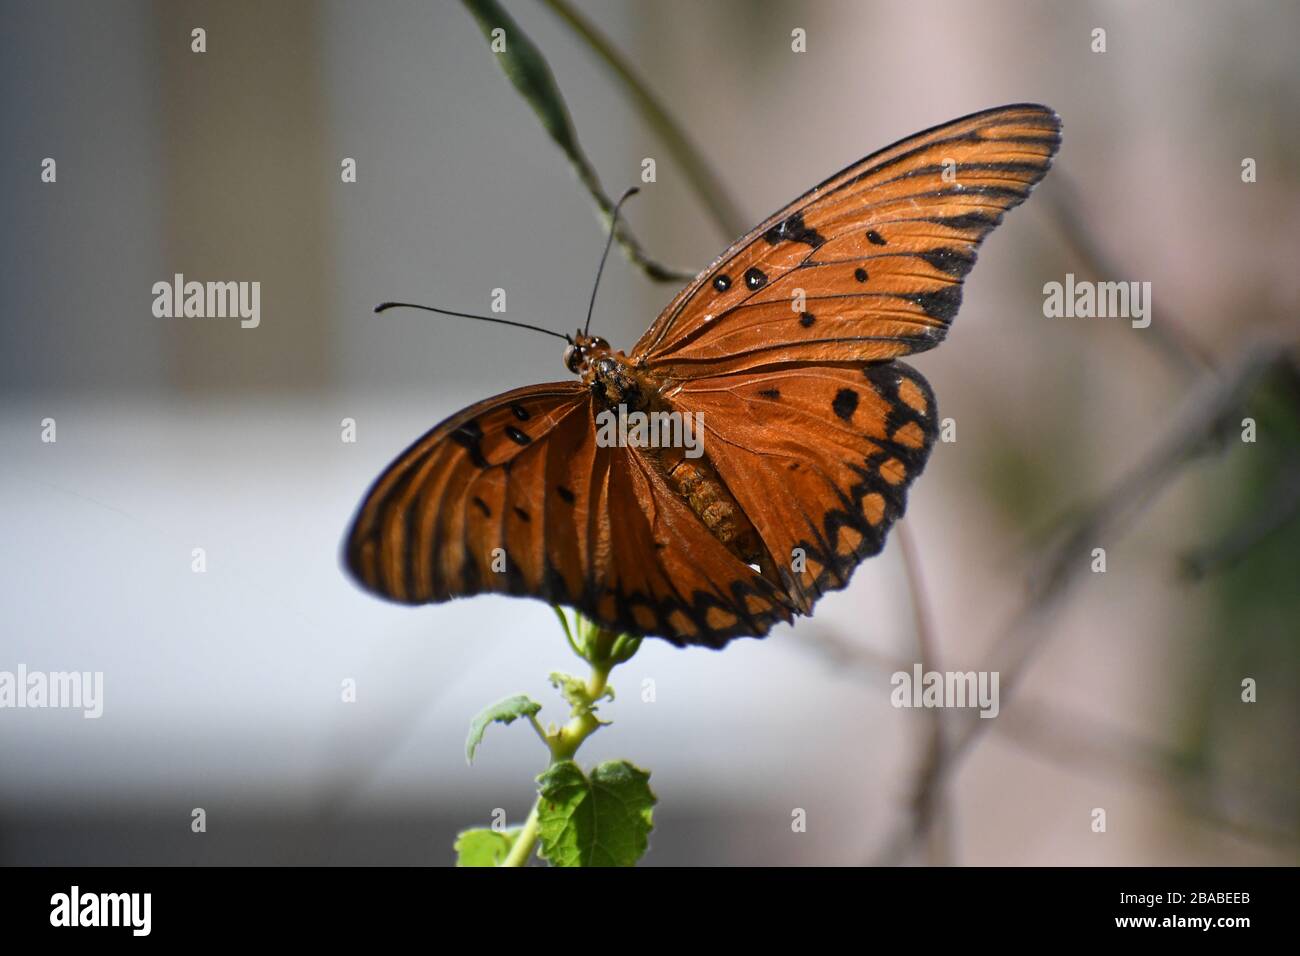 Orange and black butterfly on a flower Stock Photo